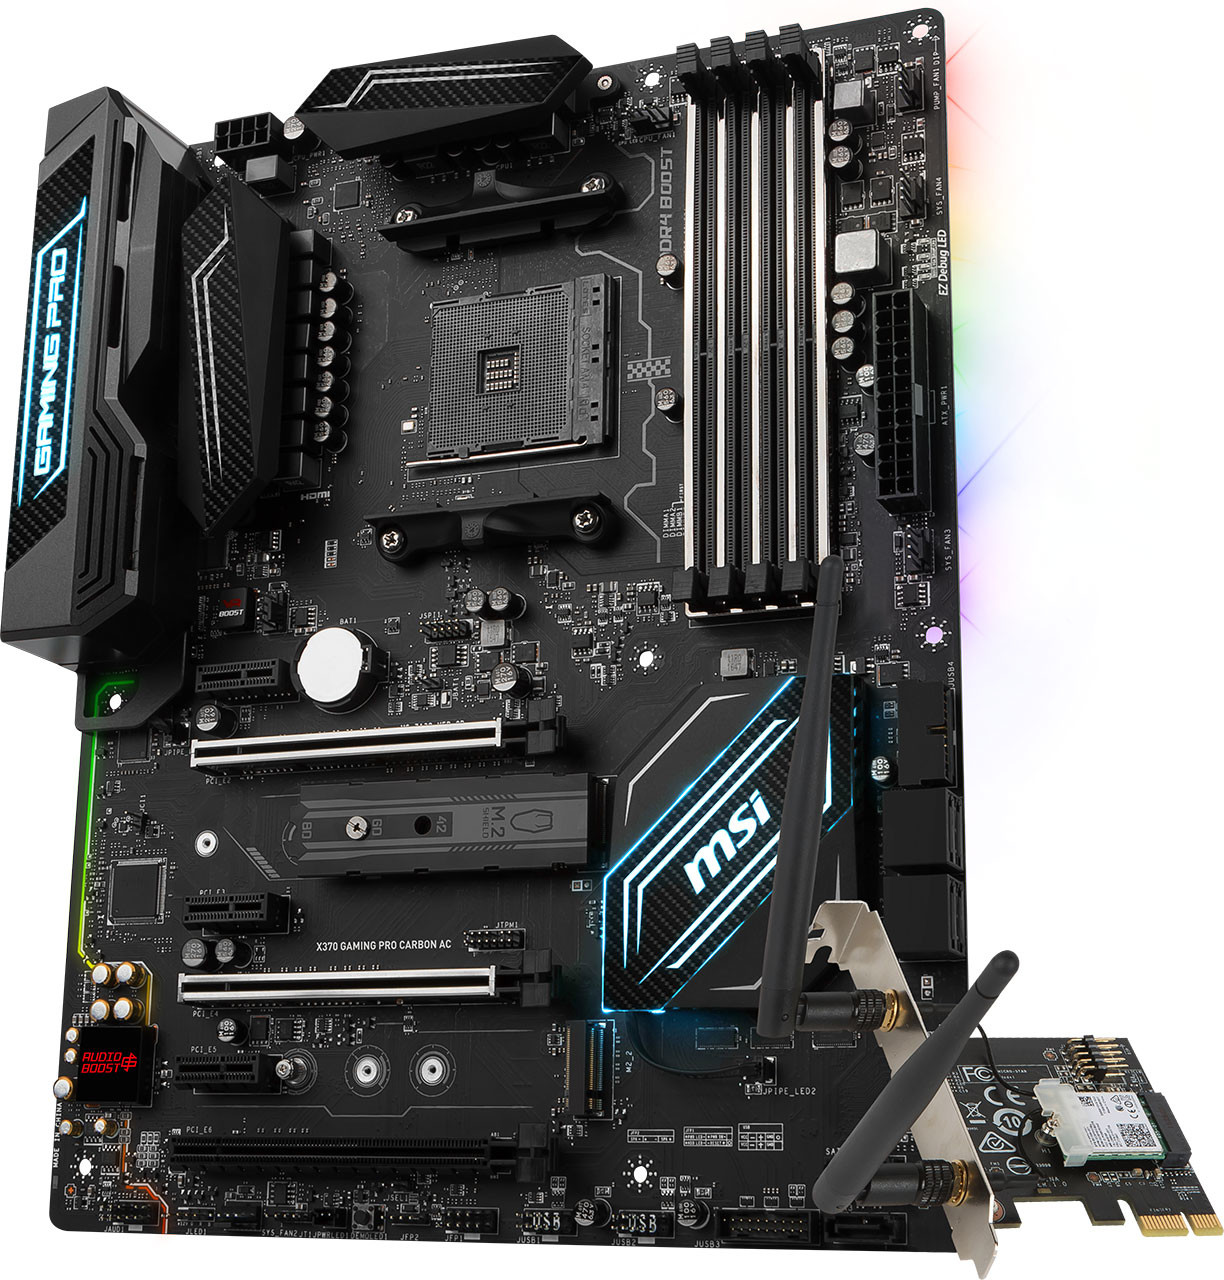 MSI Intros X370 Gaming Pro Carbon AC Motherboard | TechPowerUp